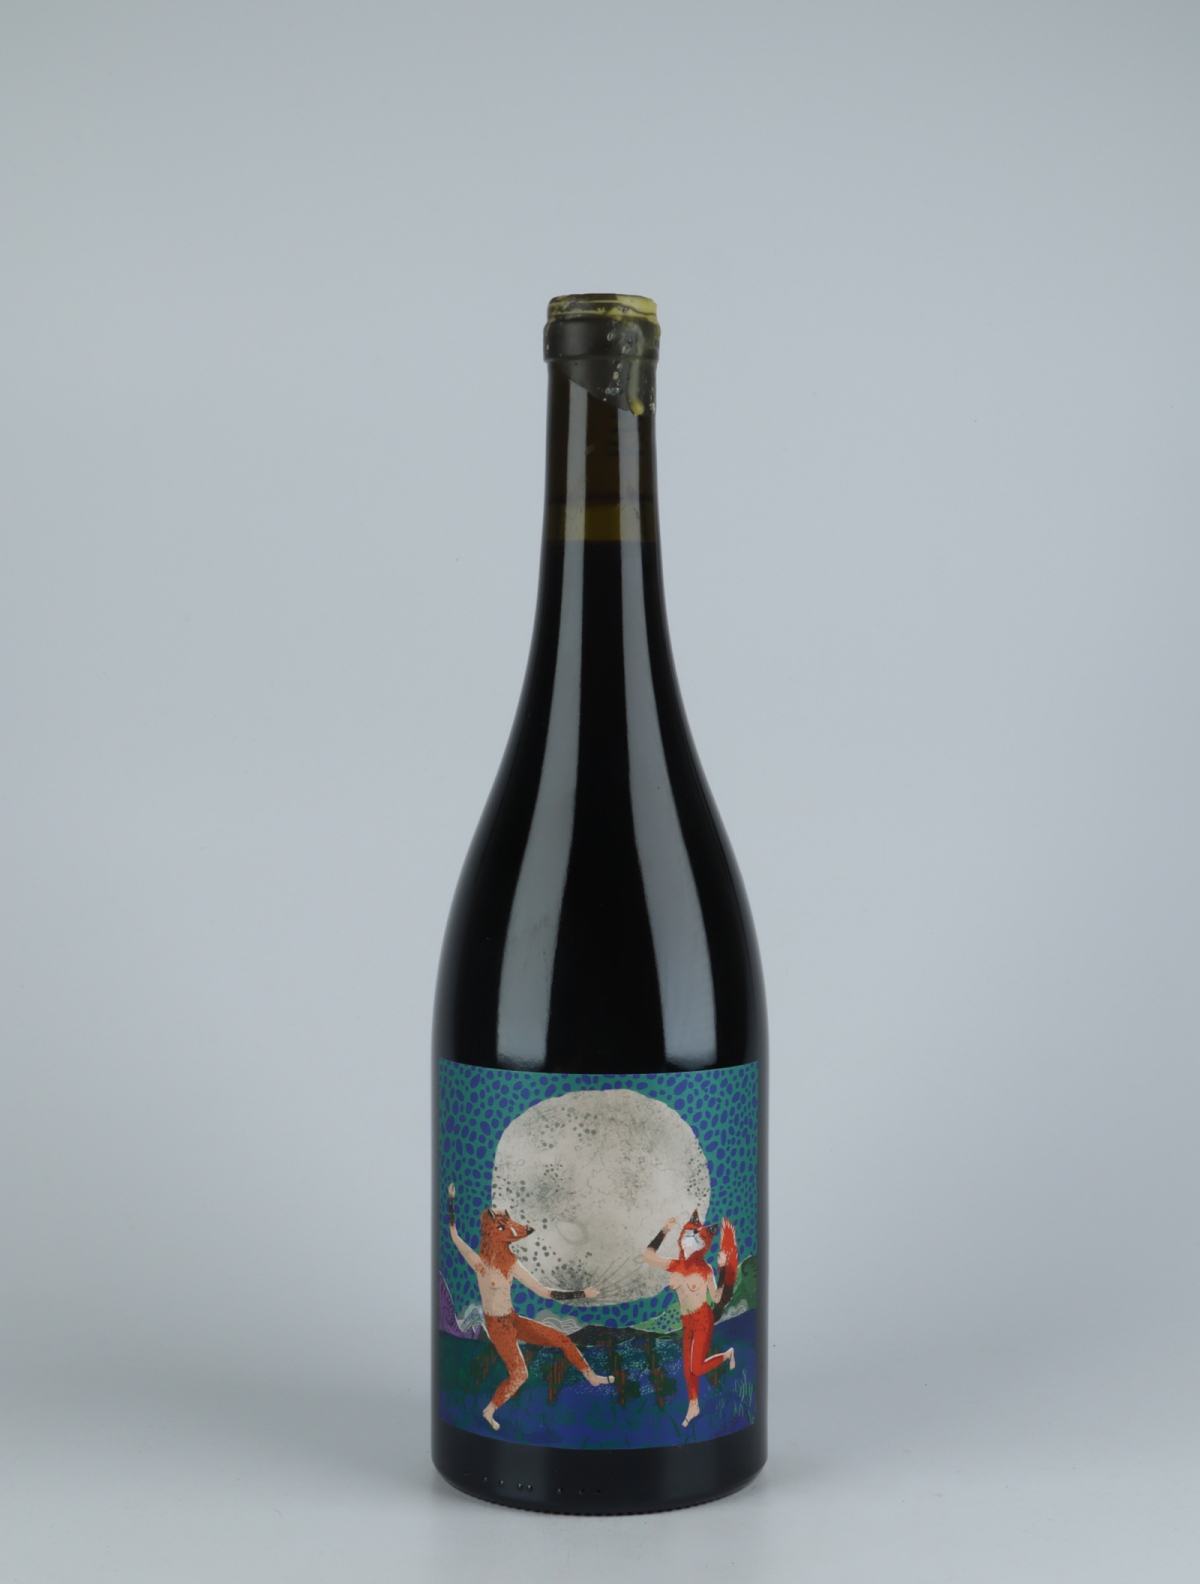 A bottle 2020 Luna Llena Red wine from Kindeli, Nelson in New Zealand